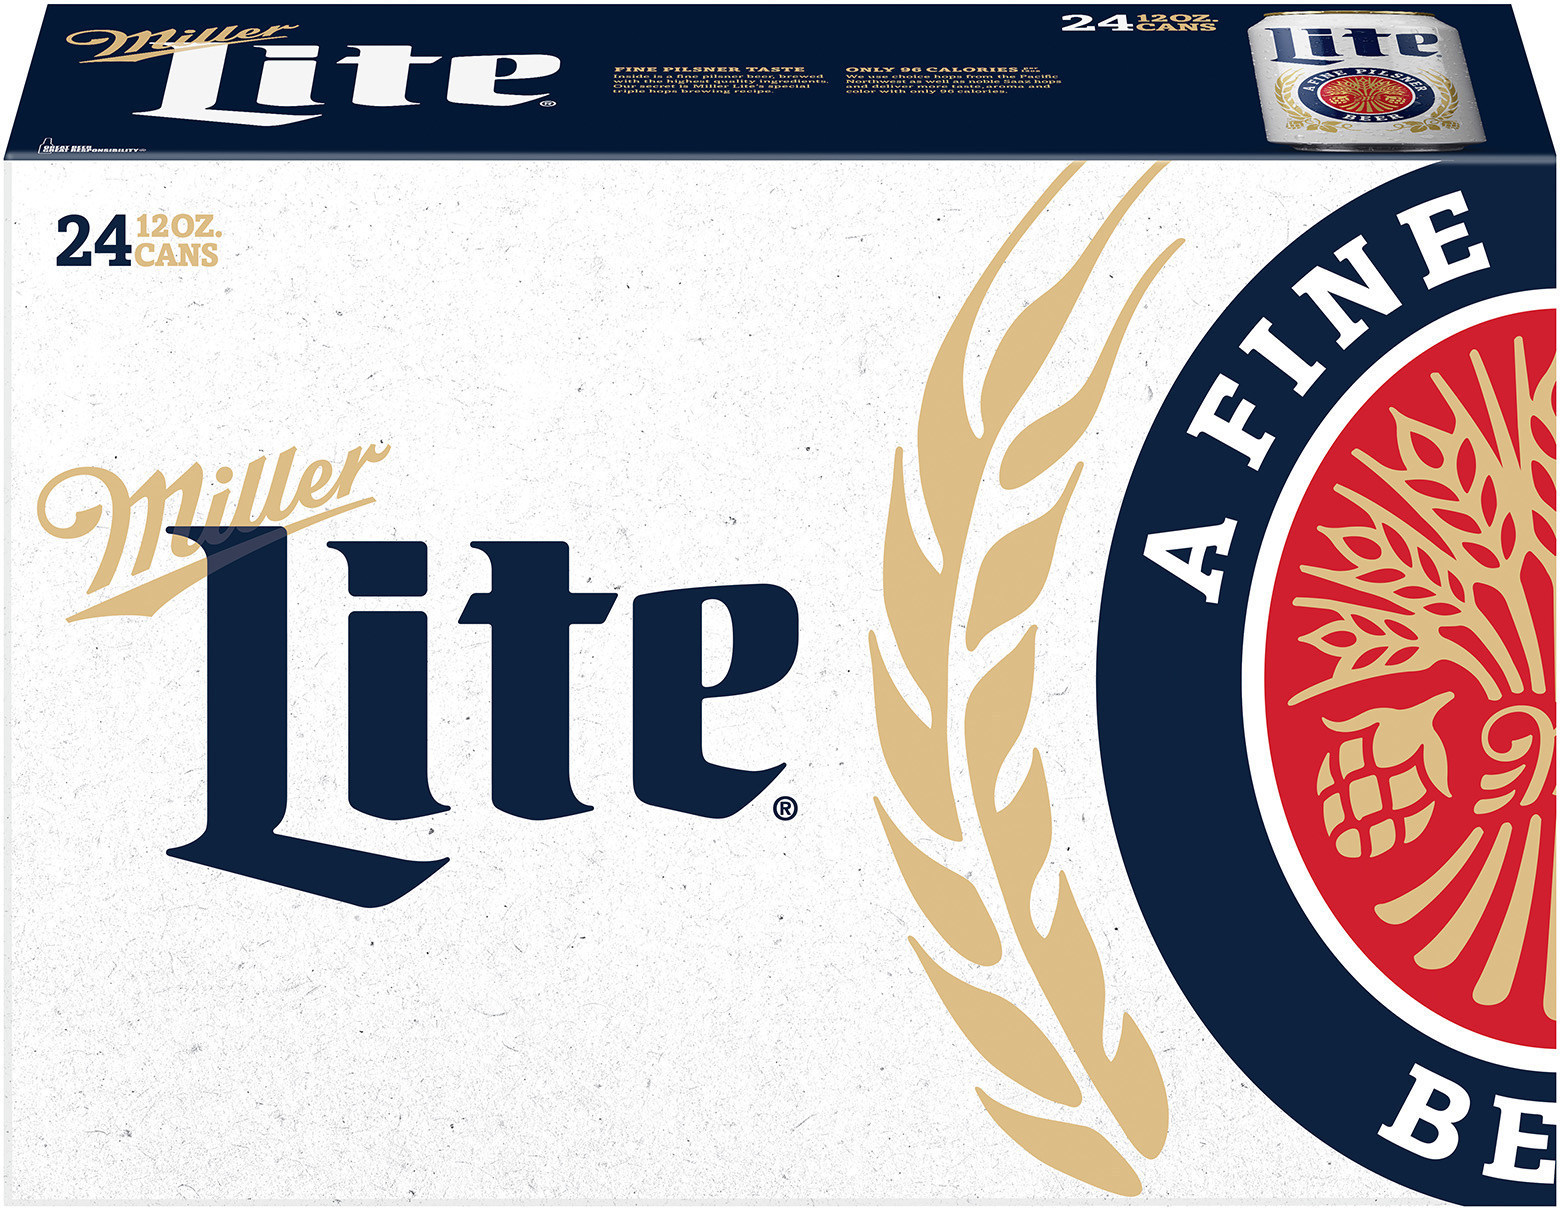 Free Miller Lite delivery offered this weekend in D.C.